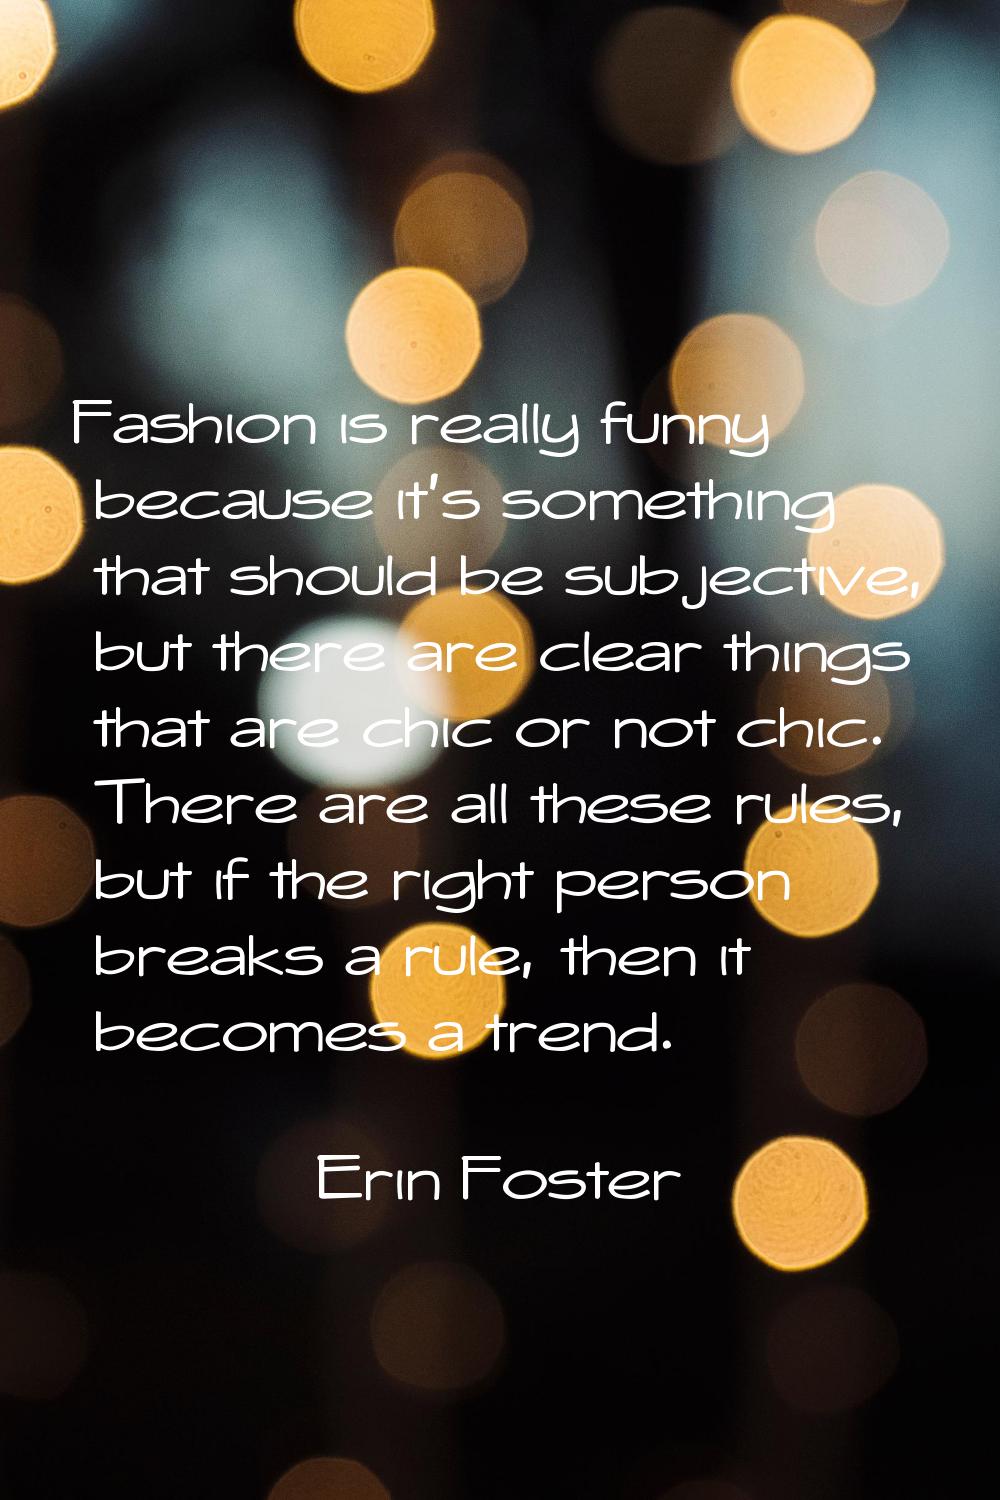 Fashion is really funny because it's something that should be subjective, but there are clear thing